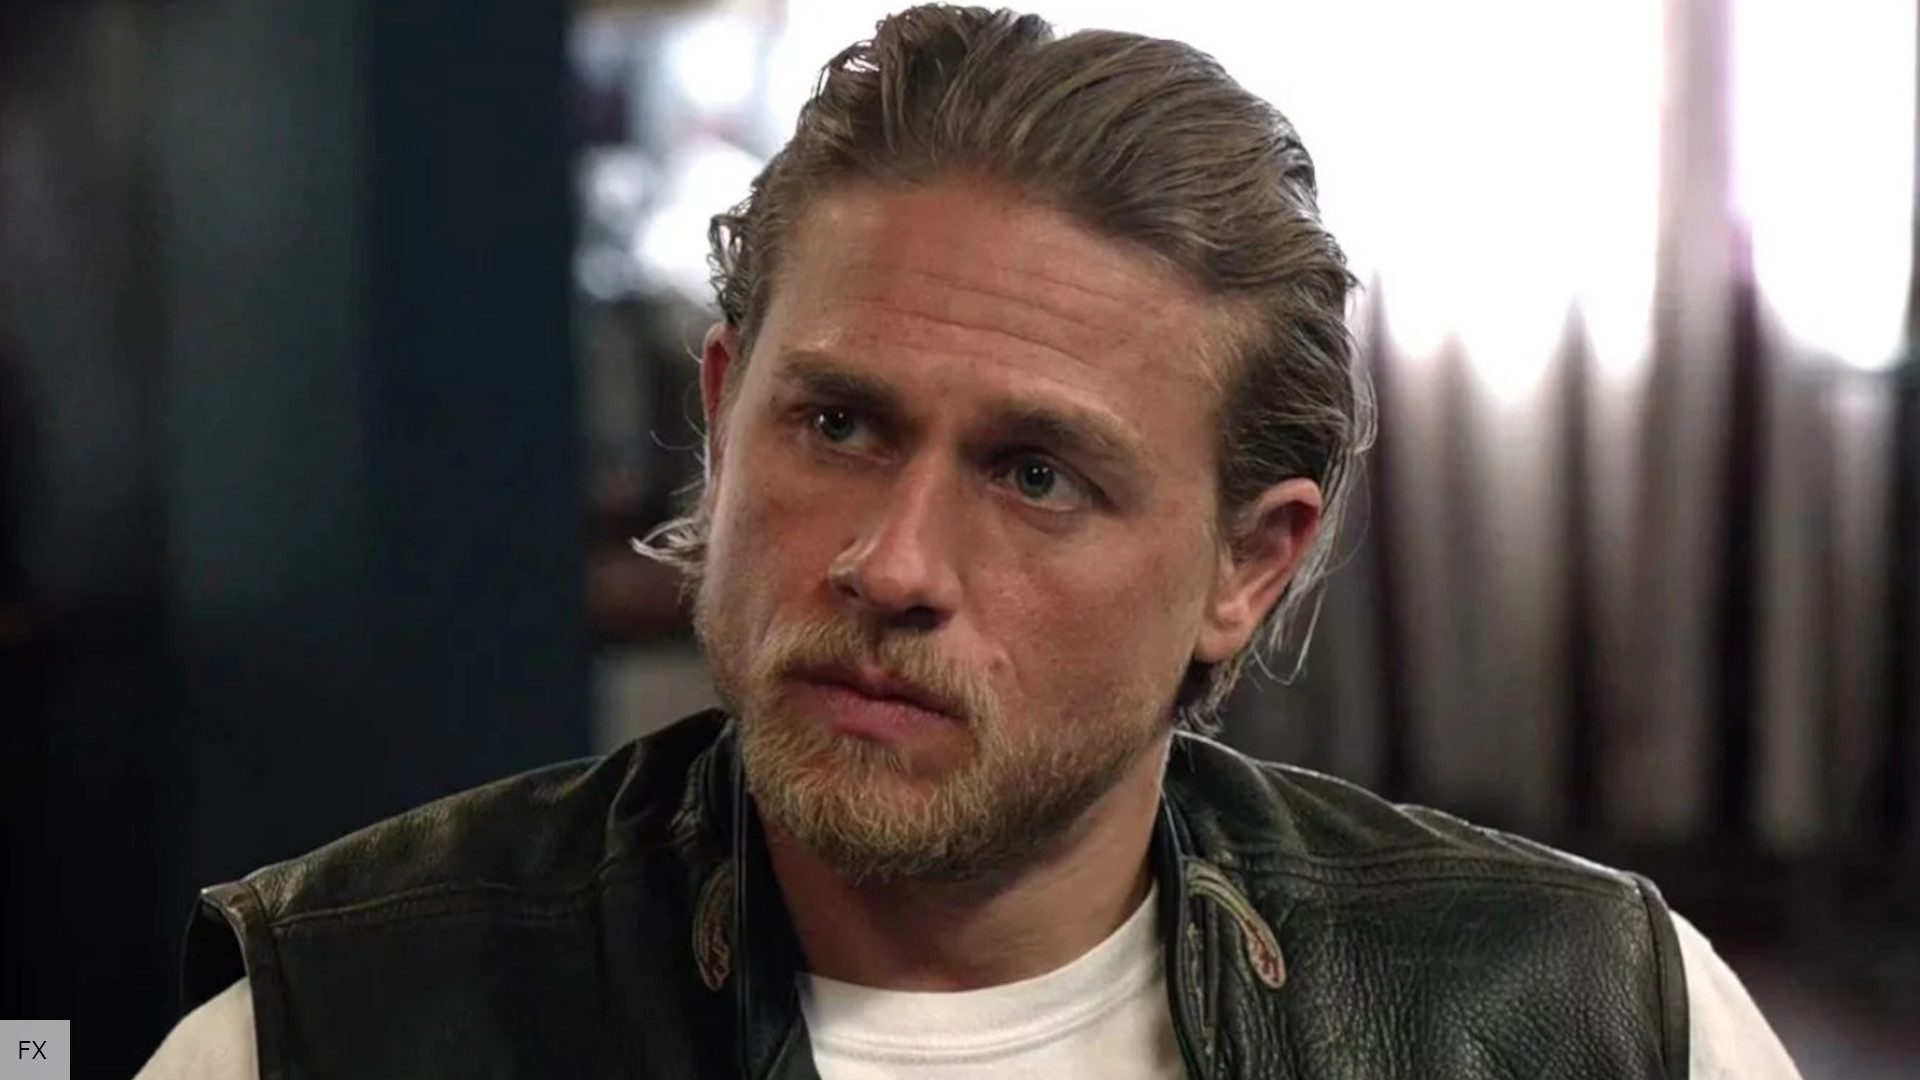 Yellowstone shares “unfair” reason why he left Sons of Anarchy | The Digital Fix